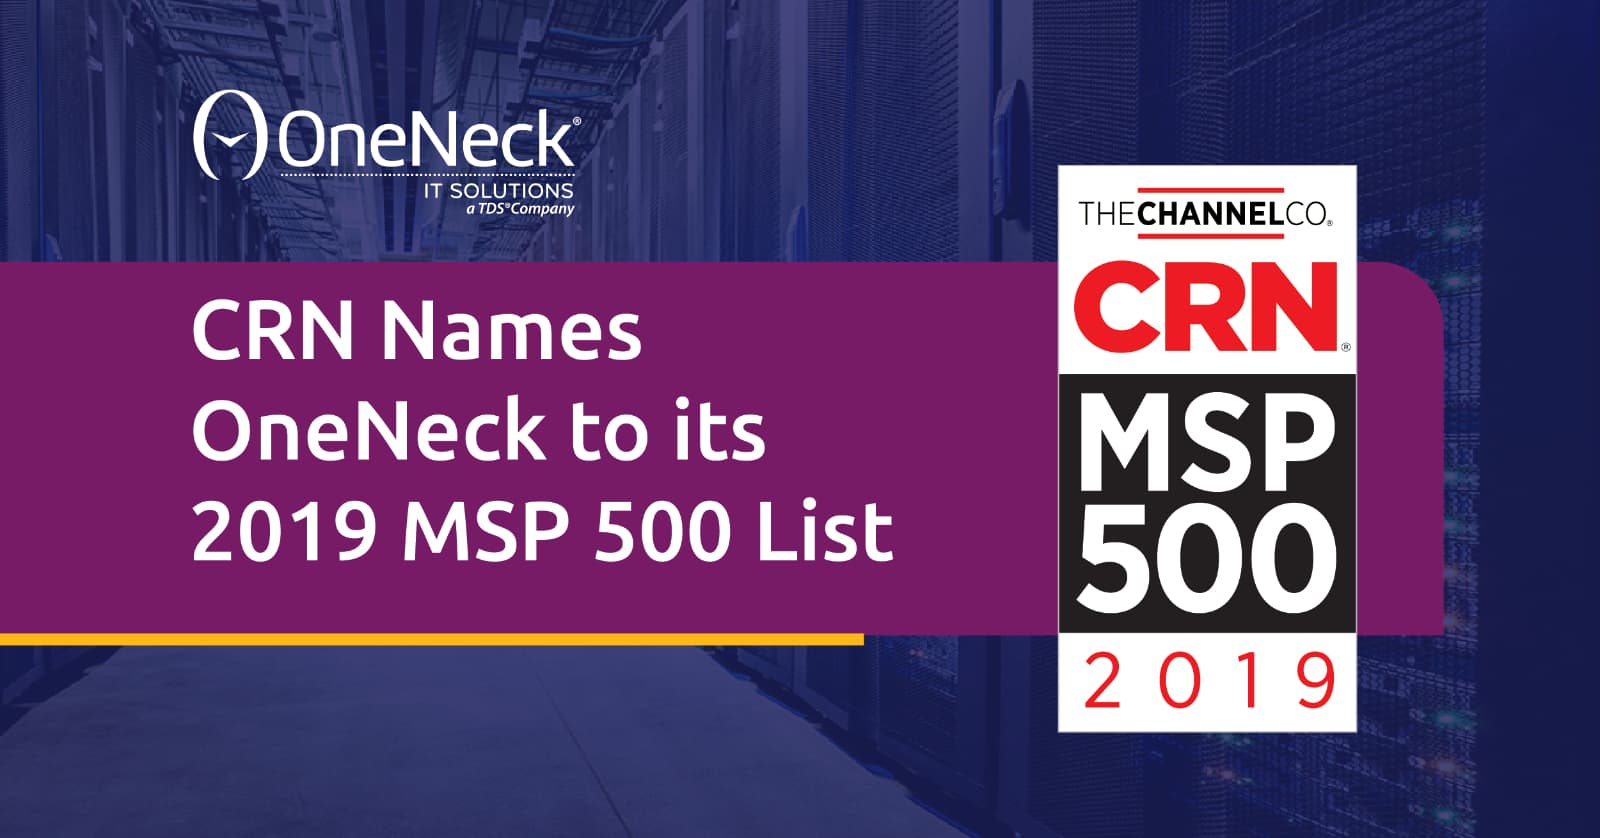 CRN Names OneNeck to its 2019 MSP 500 List